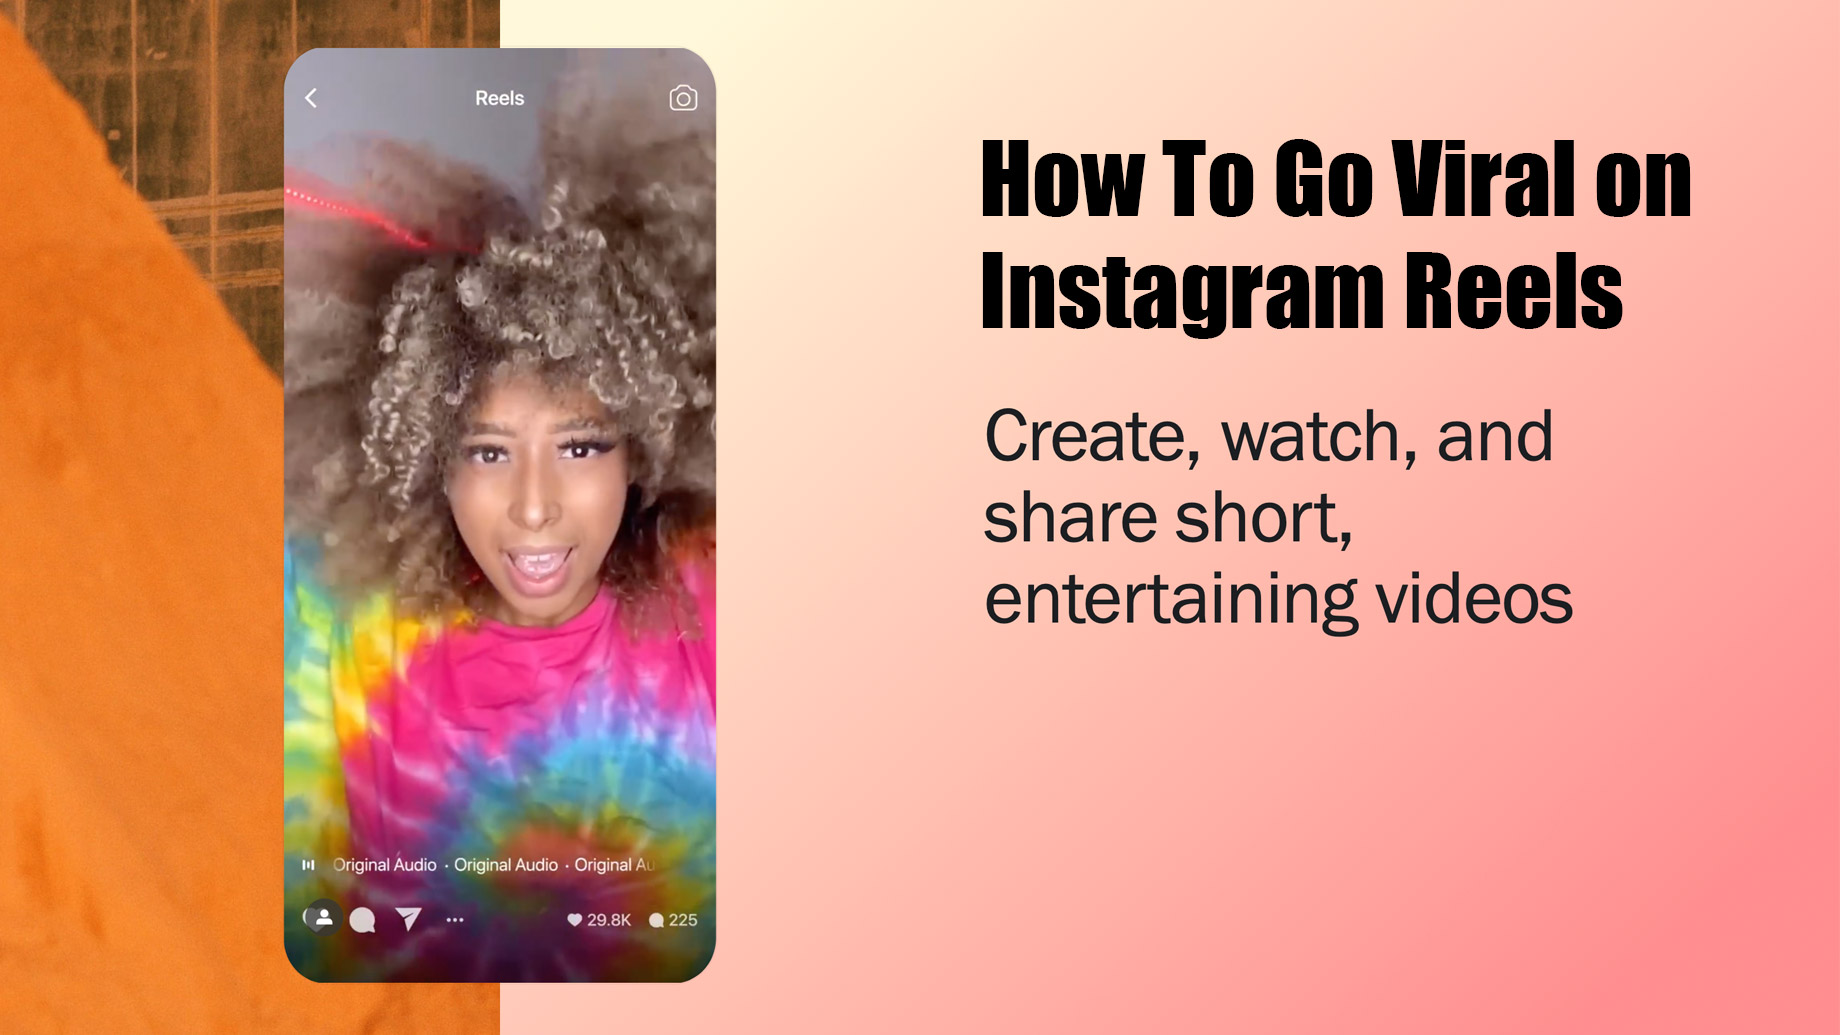 How To Go Viral on Instagram Reels - 5 Ultimate Tips